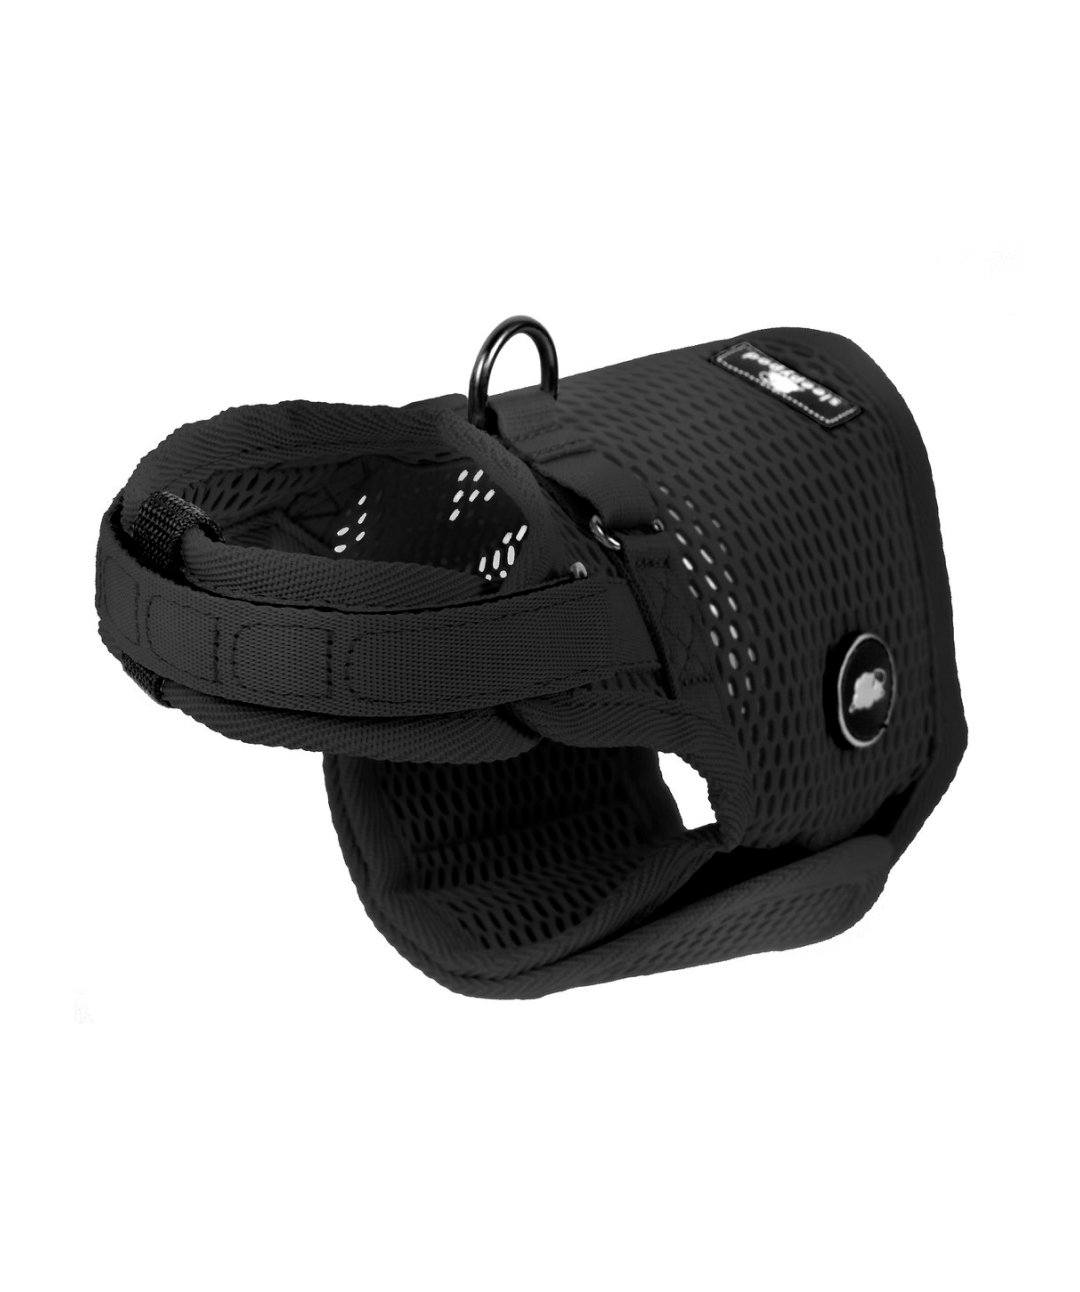 Choke Free Dog Harness for dogs under 15 lbs